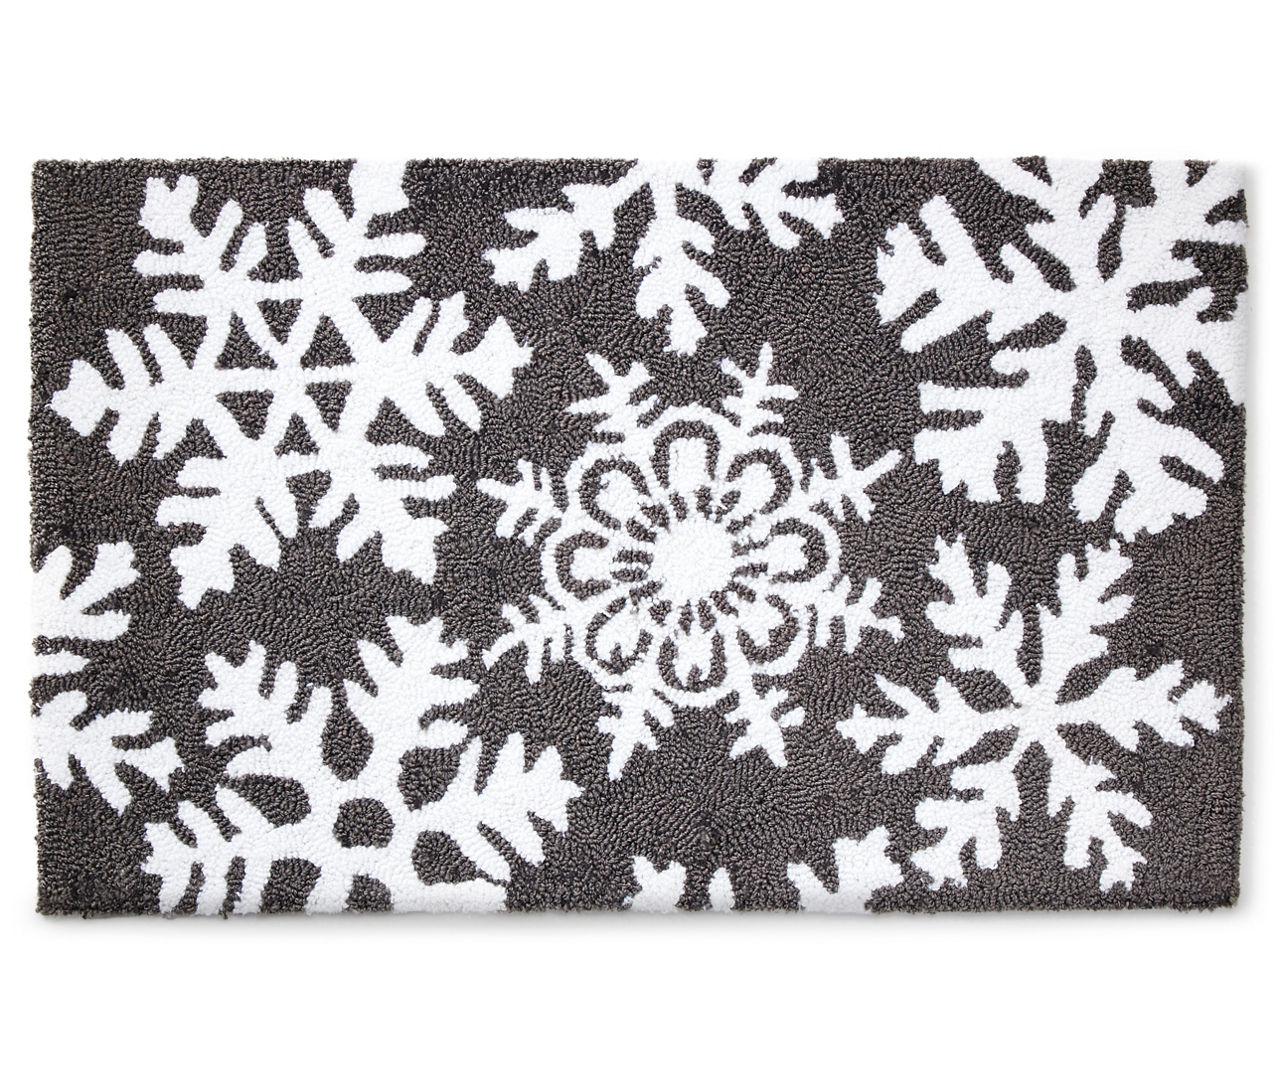 Indoor/Outdoor Snowflakes Holiday Hooked Accent Rug